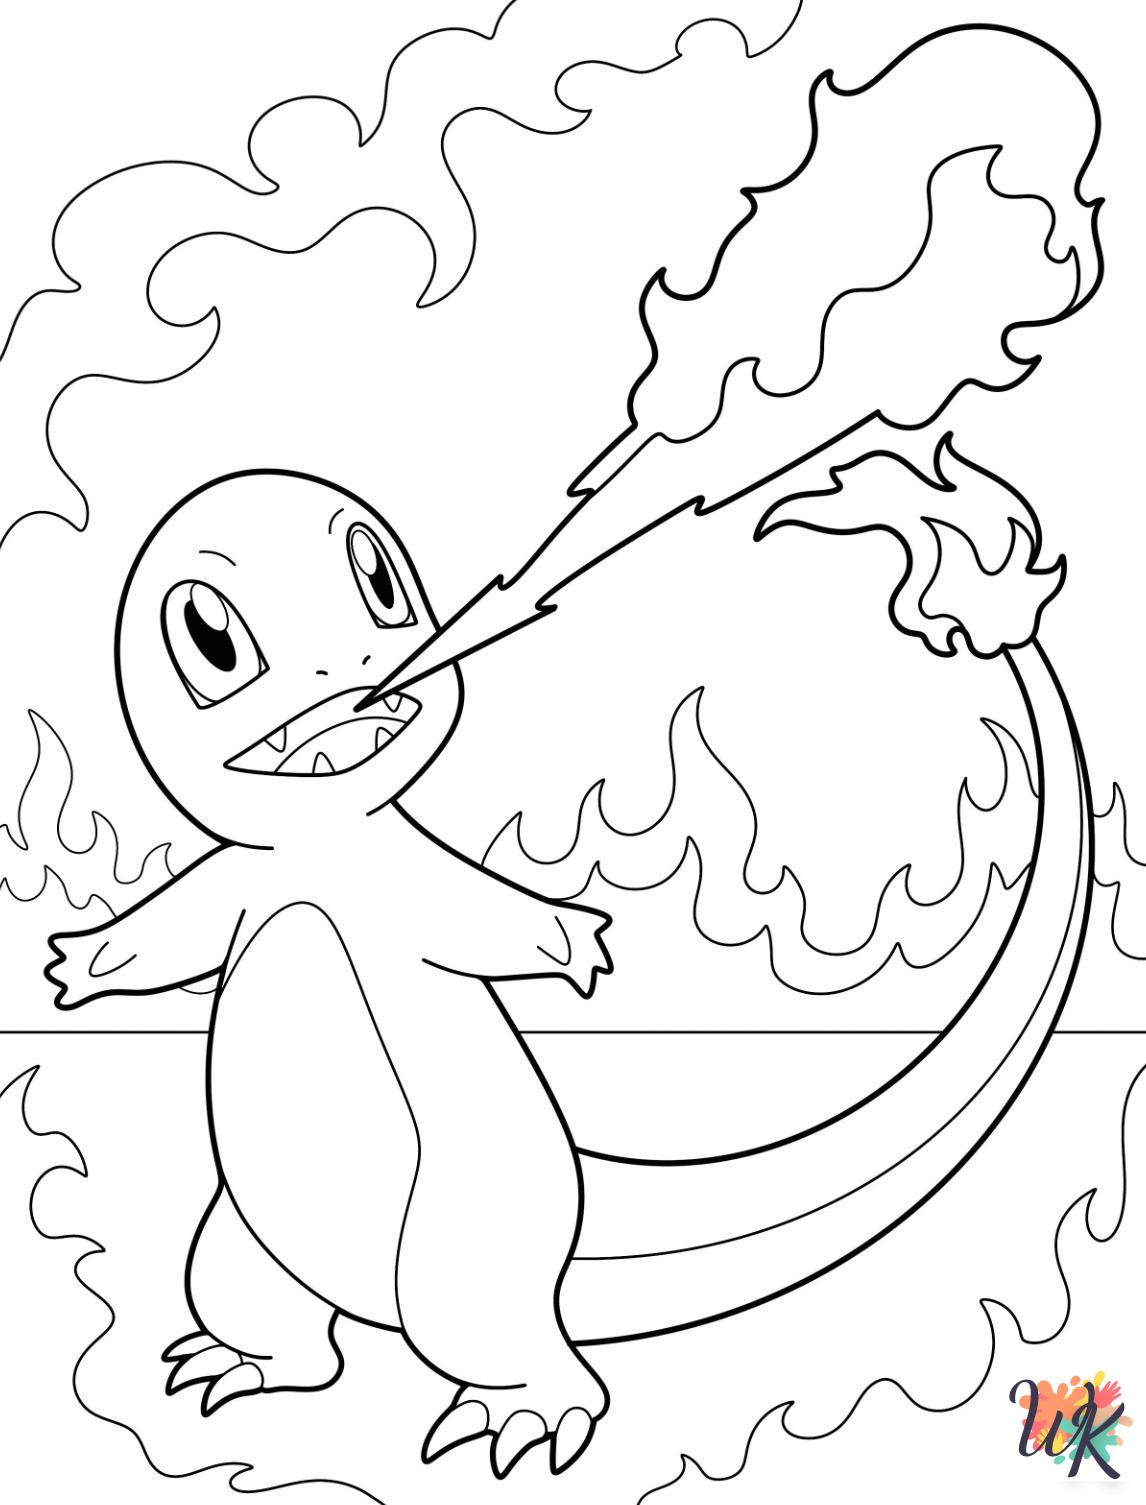 Charmander coloring pages printable